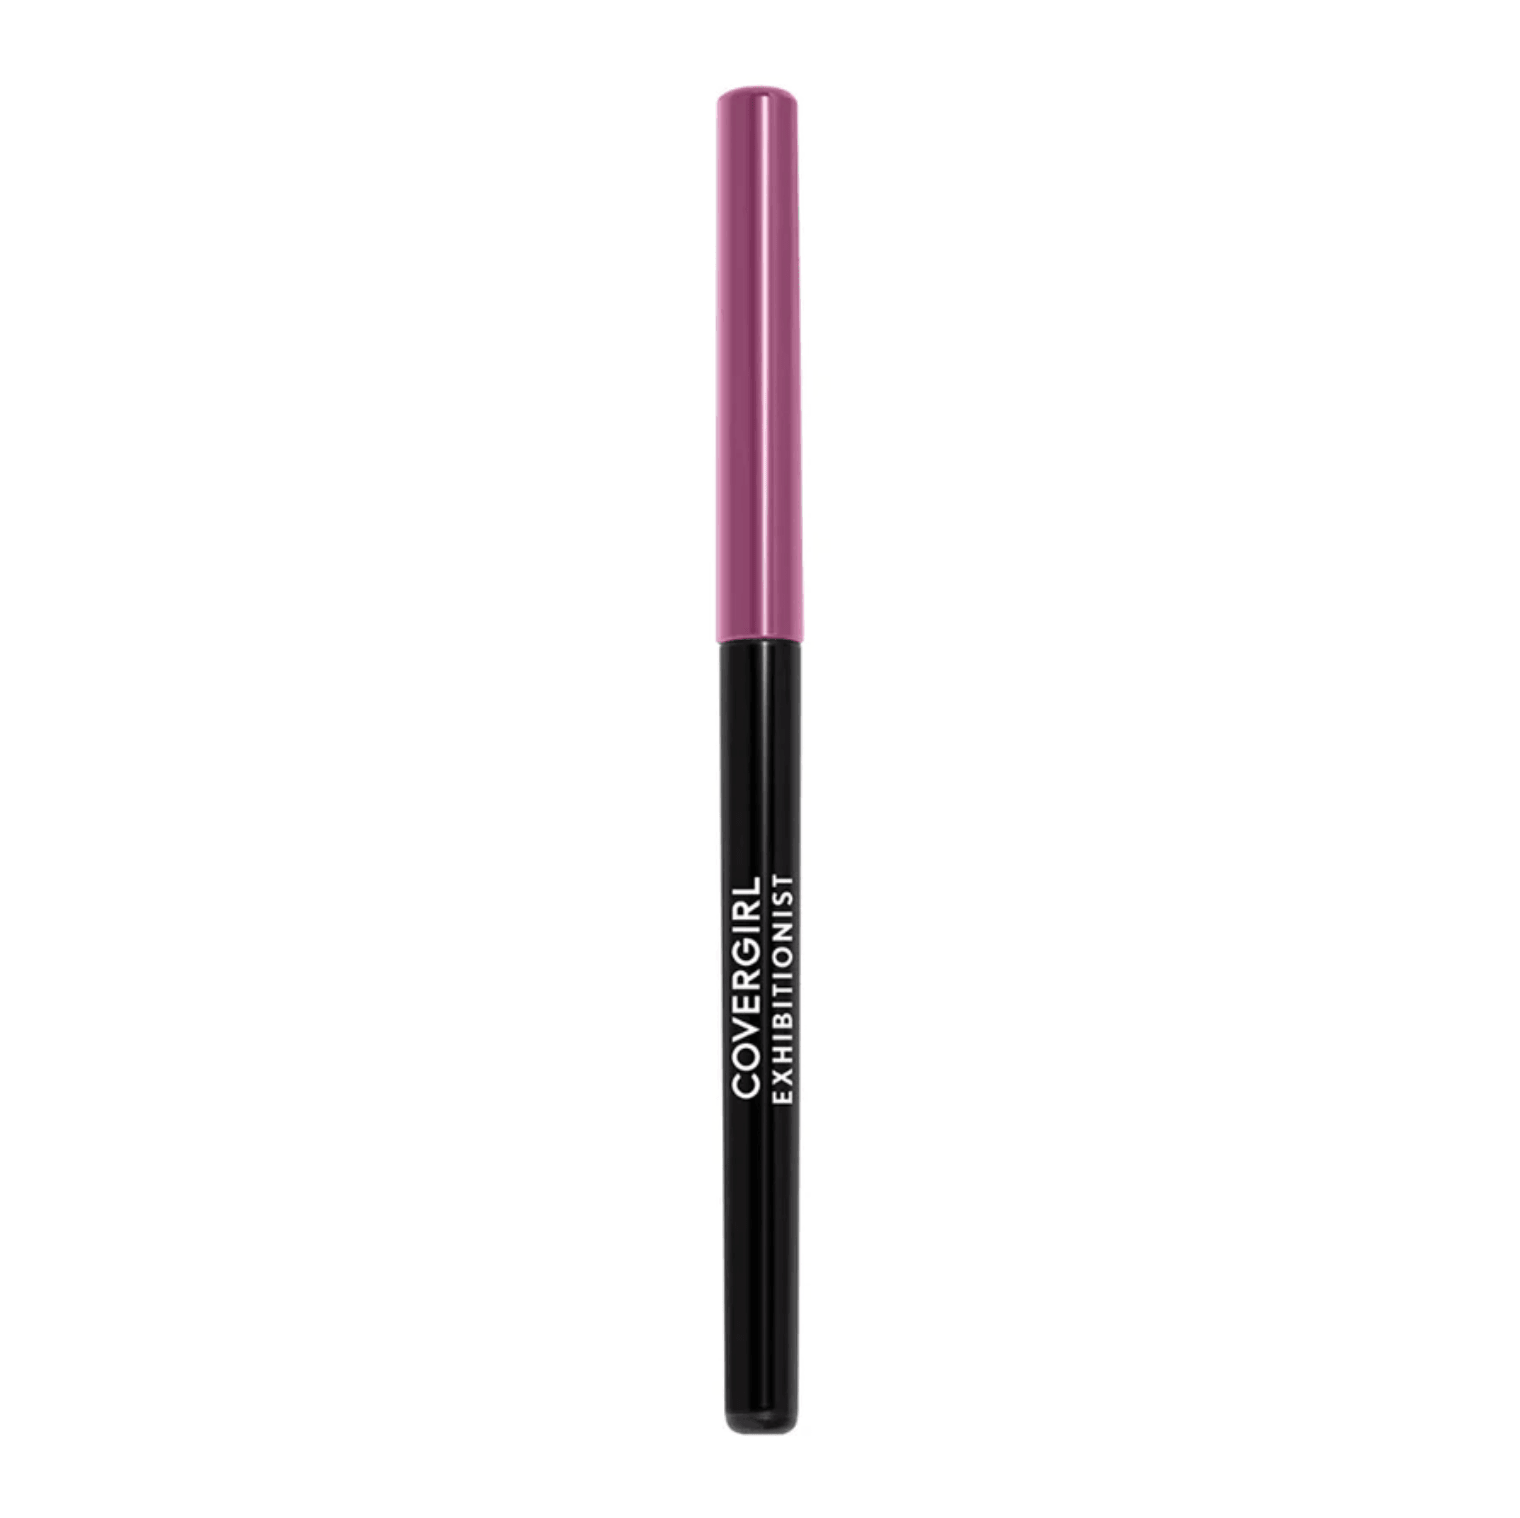 Covergirl Exhibitionist Lip Liner 210 Paradise Pink - www.indiancart.com.au - Lip Liner - Covergirl - Covergirl